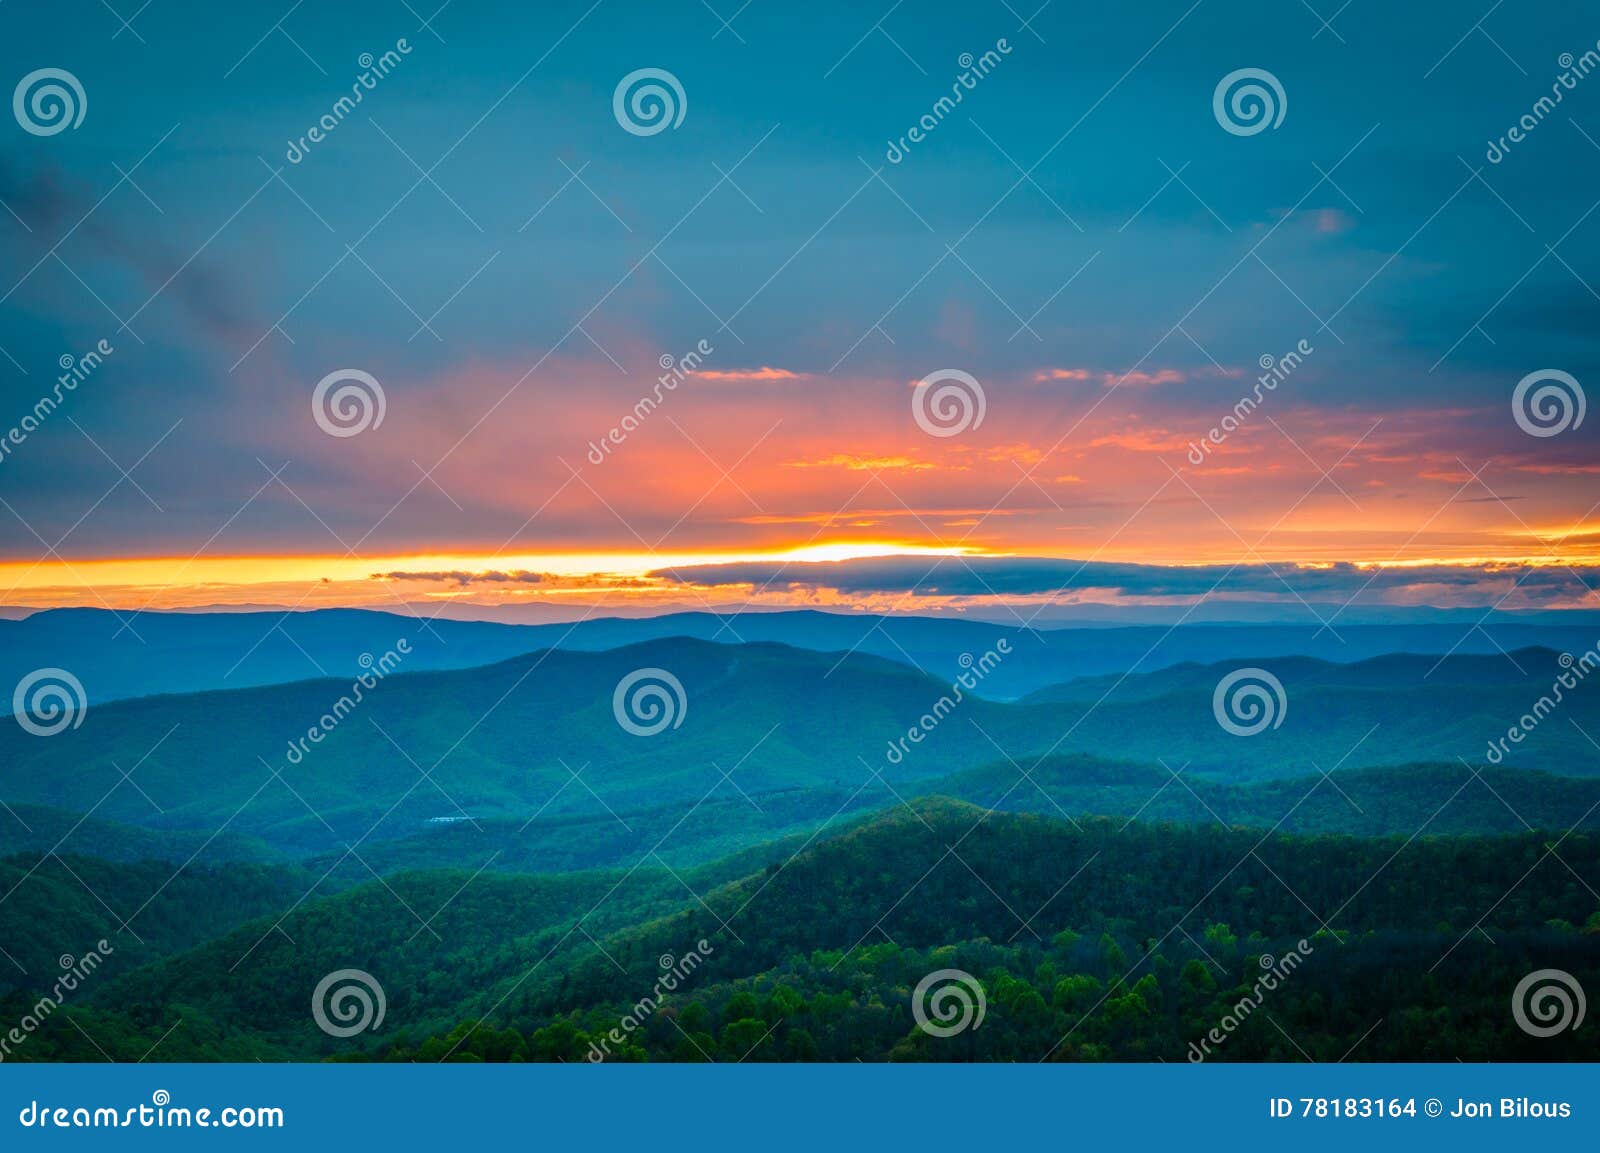 colorful spring sunset over the blue ridge mountains, seen from